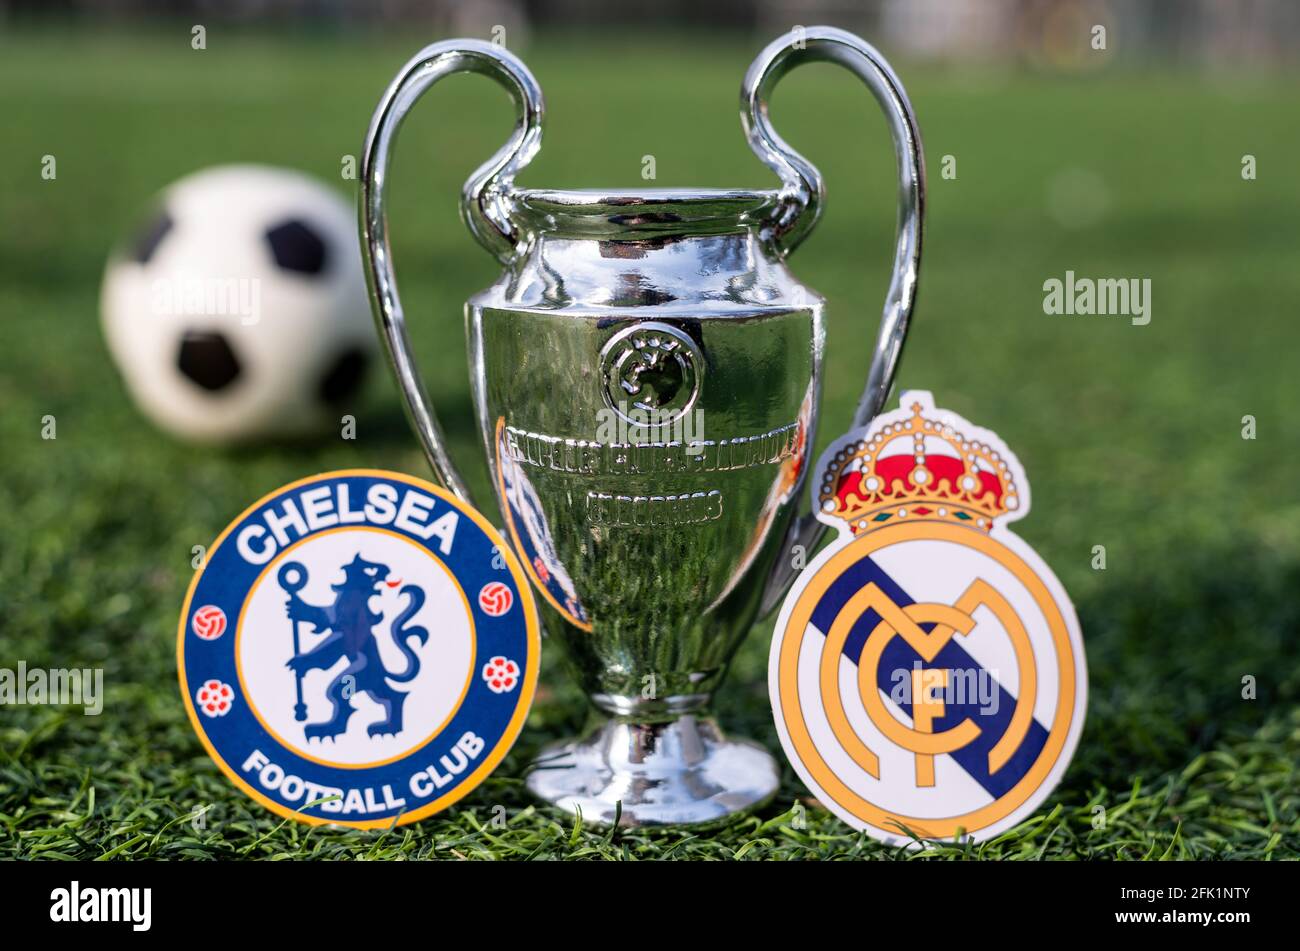 April 16 21 Moscow Russia The Uefa Champions League Cup And The Emblems Of The Football Clubs Real Madrid Cf And Chelsea F C London On The Gree Stock Photo Alamy